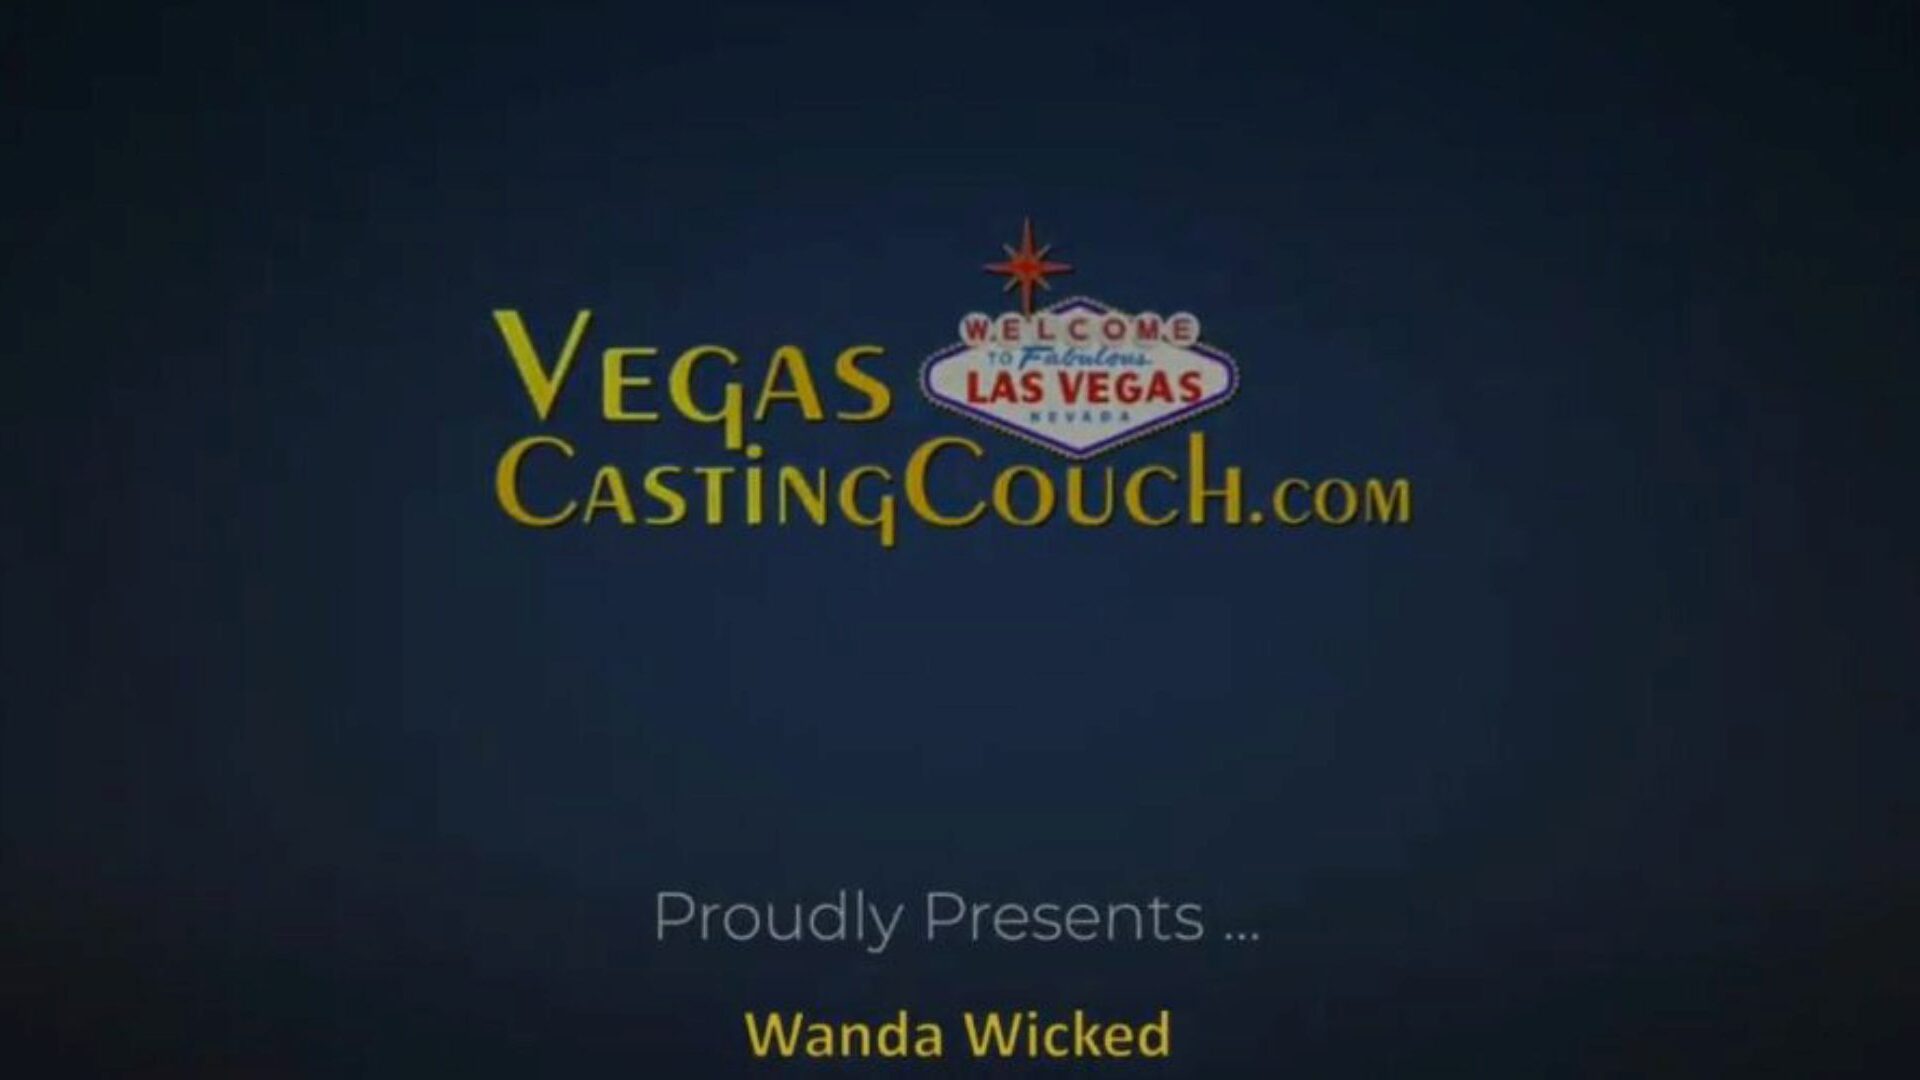 Blonde Takes Big Cock In Her Ass to Impress Producers In Las Vegas